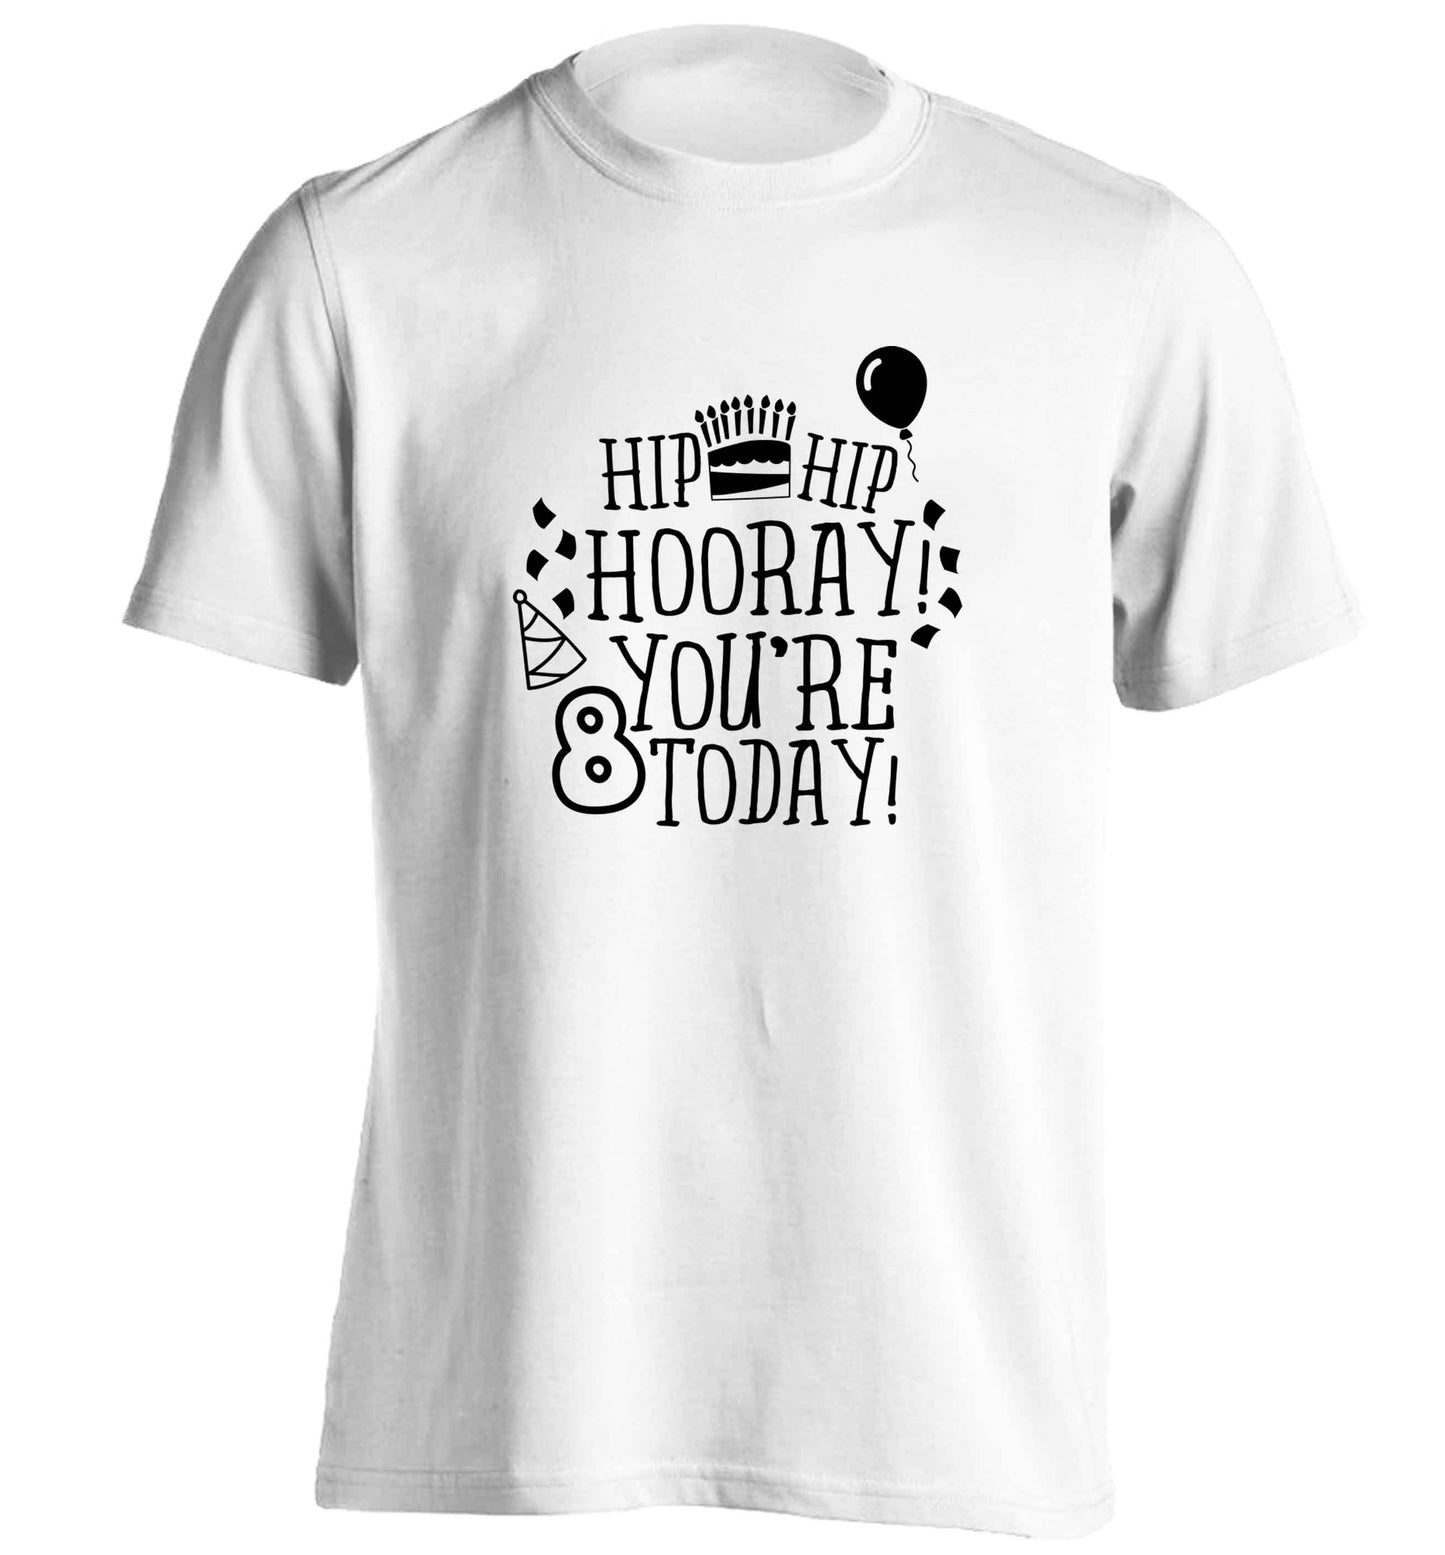 Hip hip hooray you're 8 today! adults unisex white Tshirt 2XL